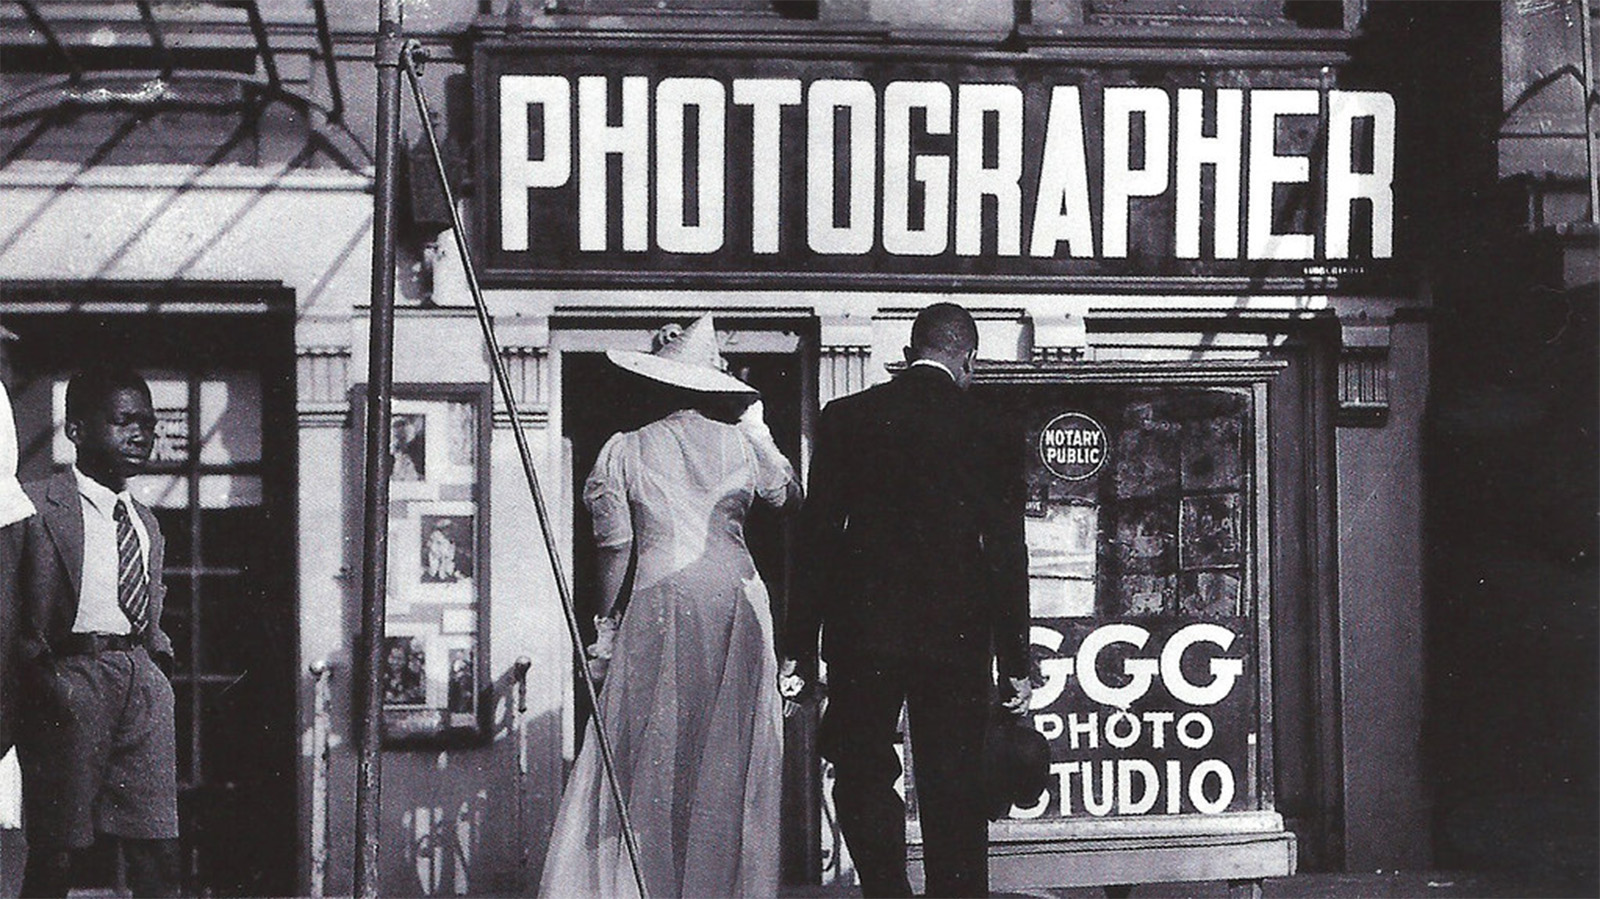 A black-and-white photo of three Black individuals standing outside of a storefront that has one large “PHOTOGRAPHER” sign above its windows and a sign that says “GGG PHOTO STUDIO” on the bottom of the window. The two men in the photo wear business suits while the woman wears a long dress with gloves and a matching pointy hat. The woman and one of the men look at the photography studio’s window displays. 